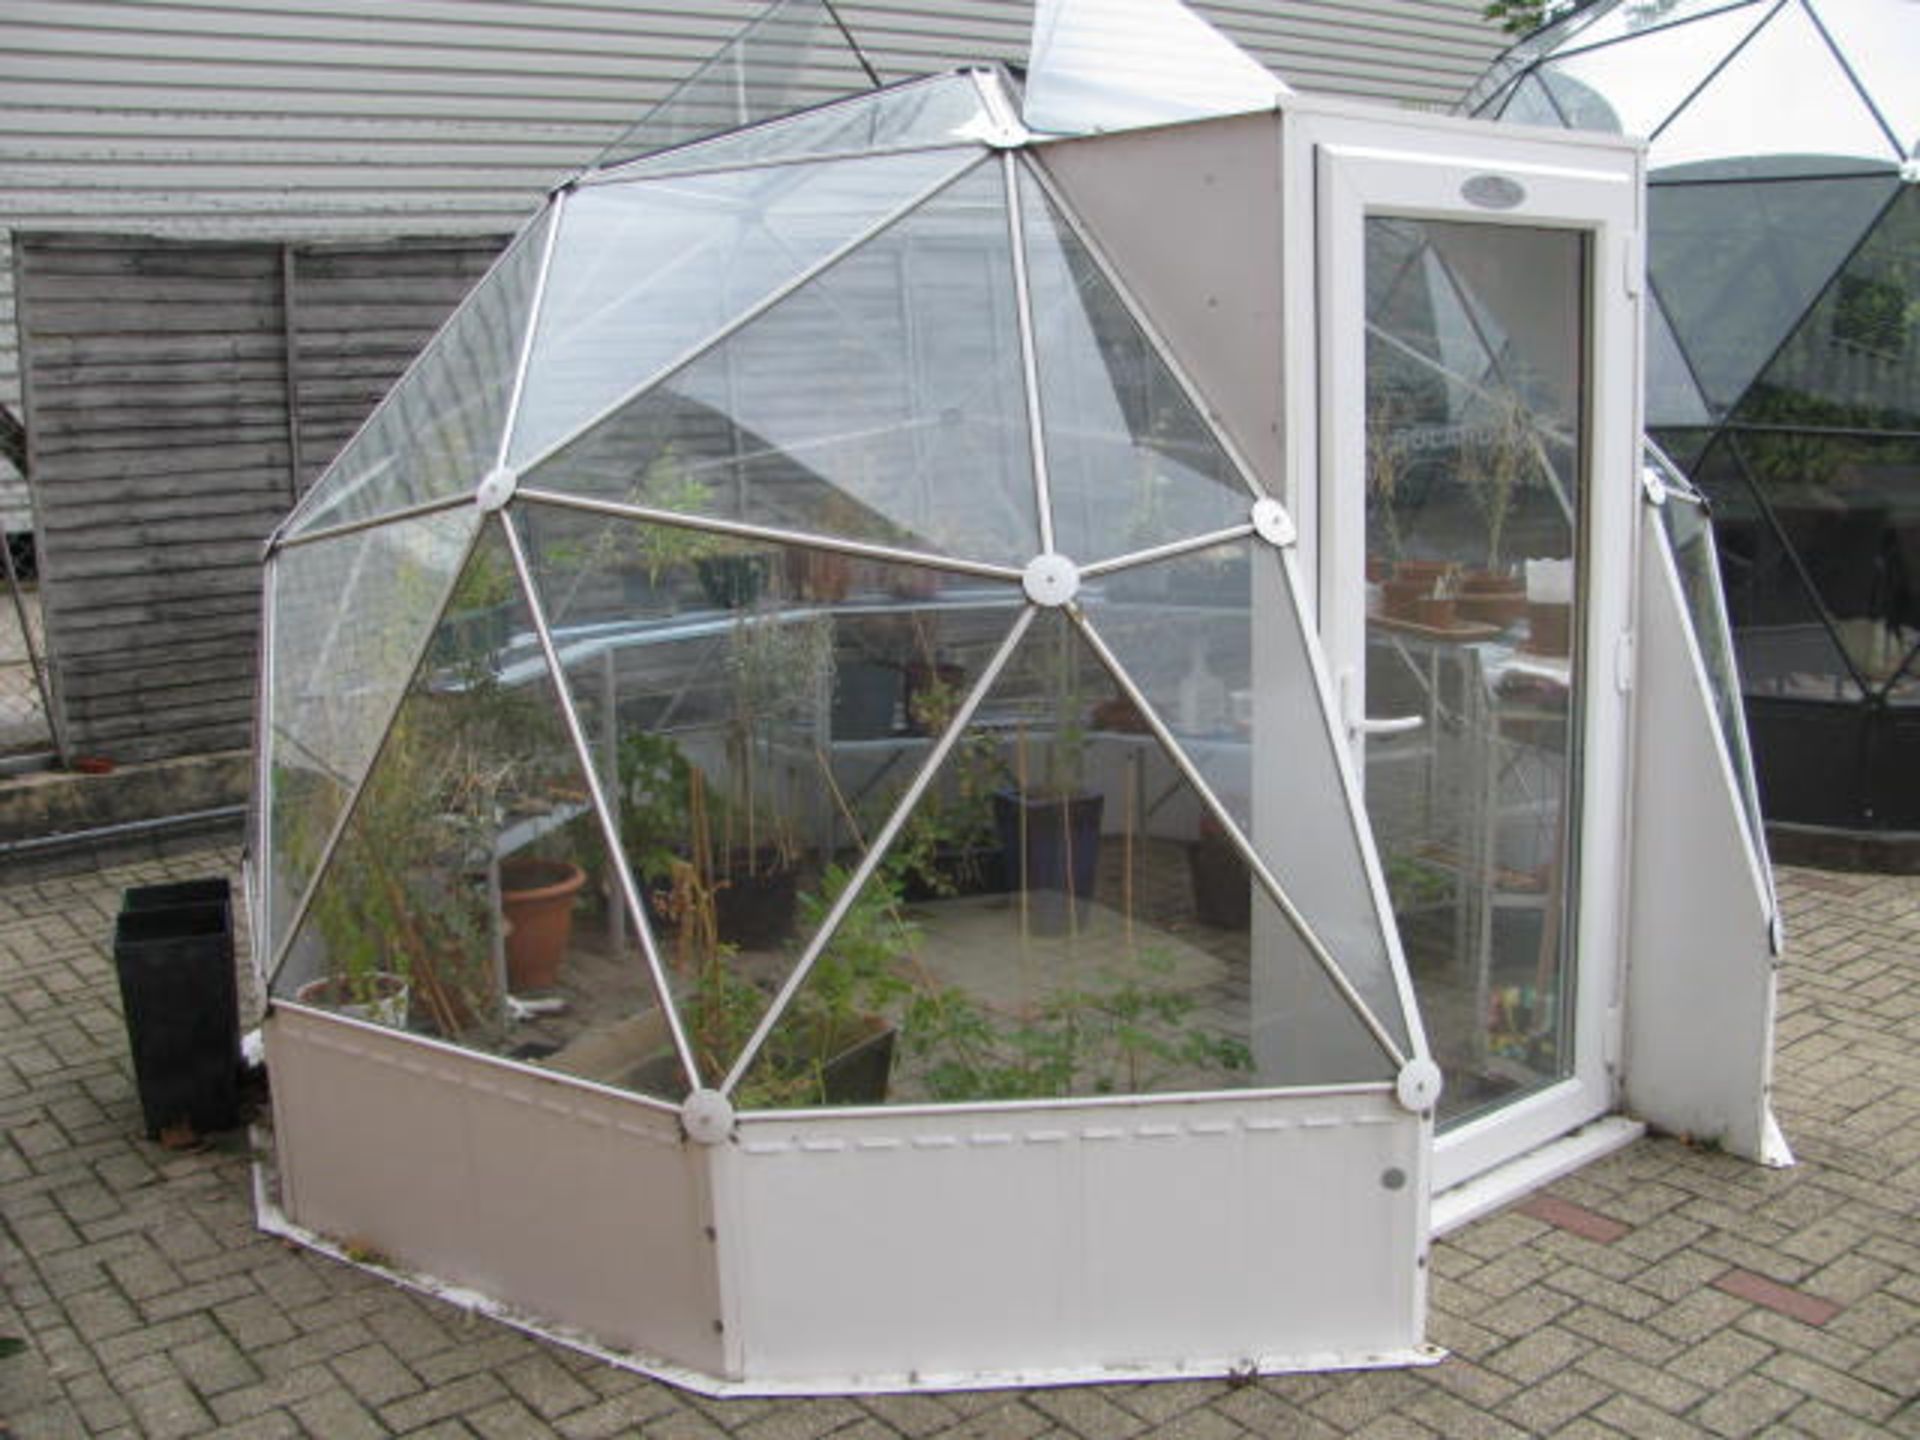 Geodesic dome green house - Image 2 of 7